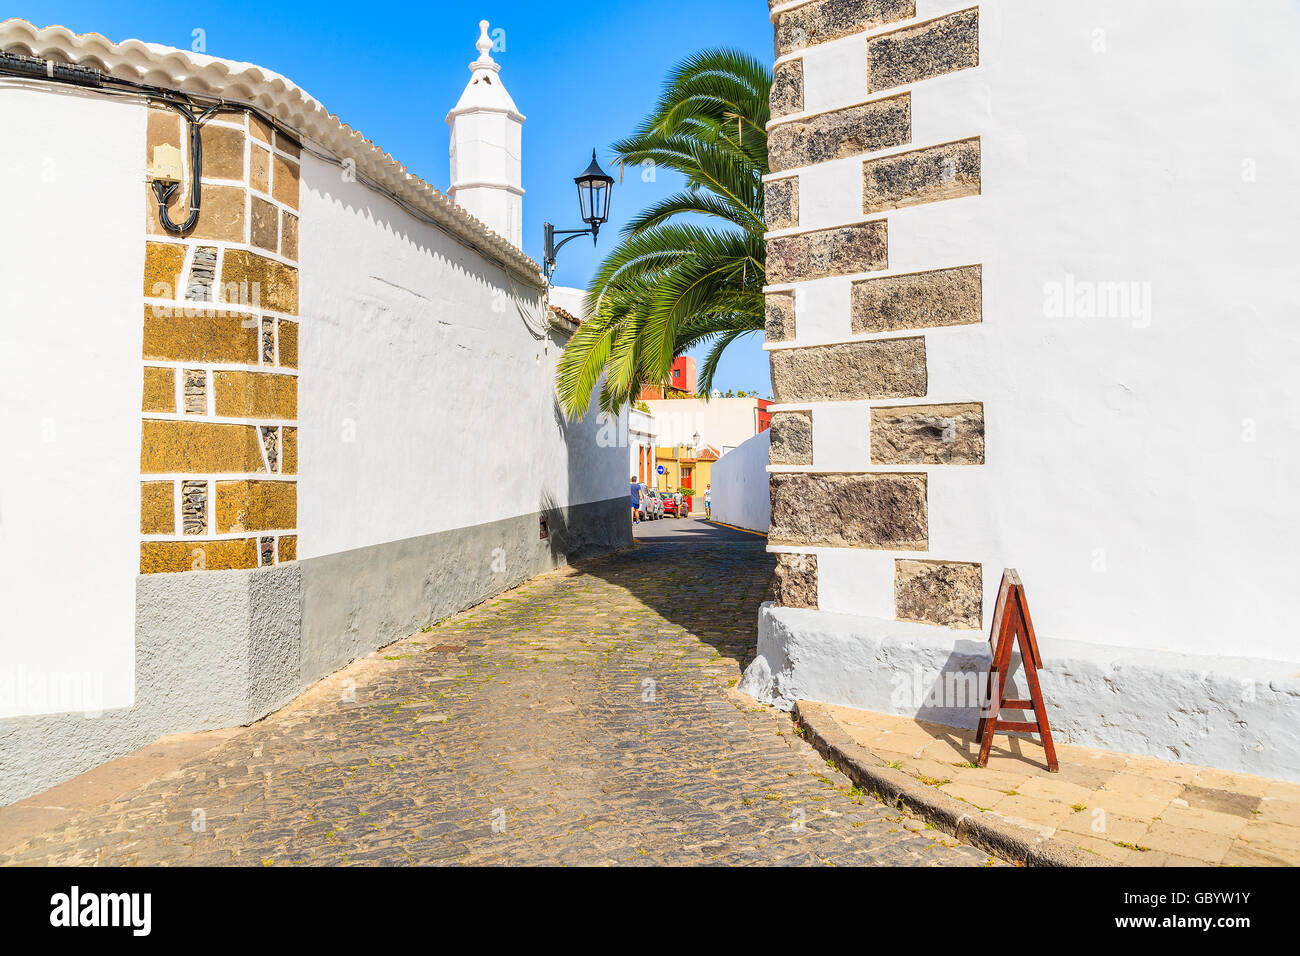 Street in old town of Garachico, Tenerife, Canary Islands, Spain Stock Photo